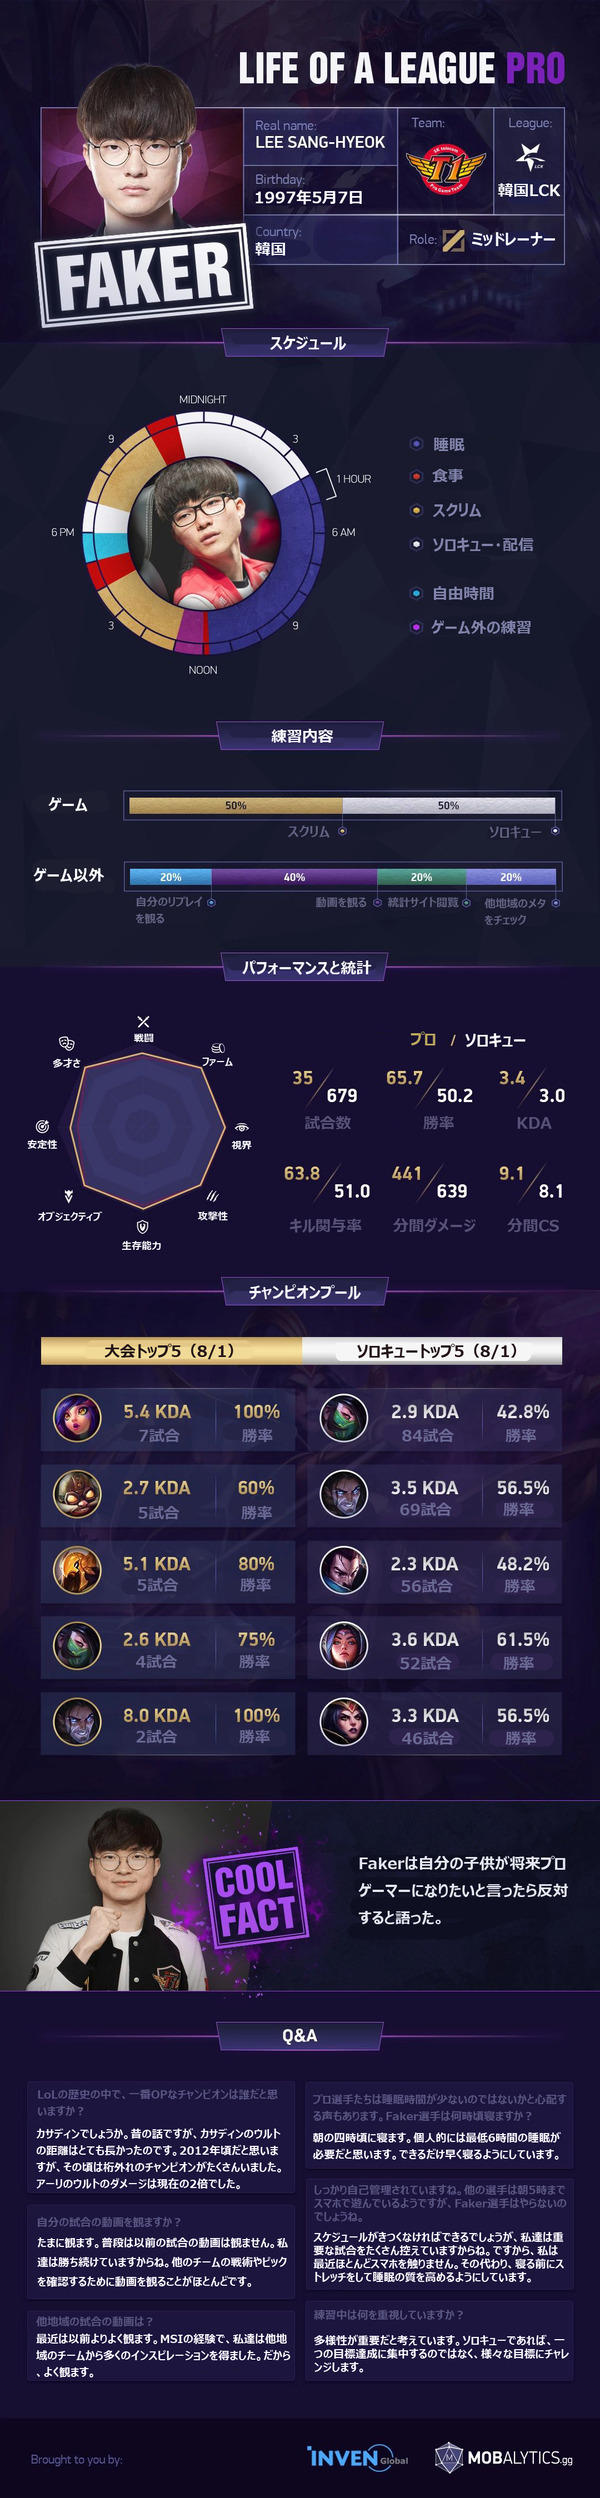 faker-infographic